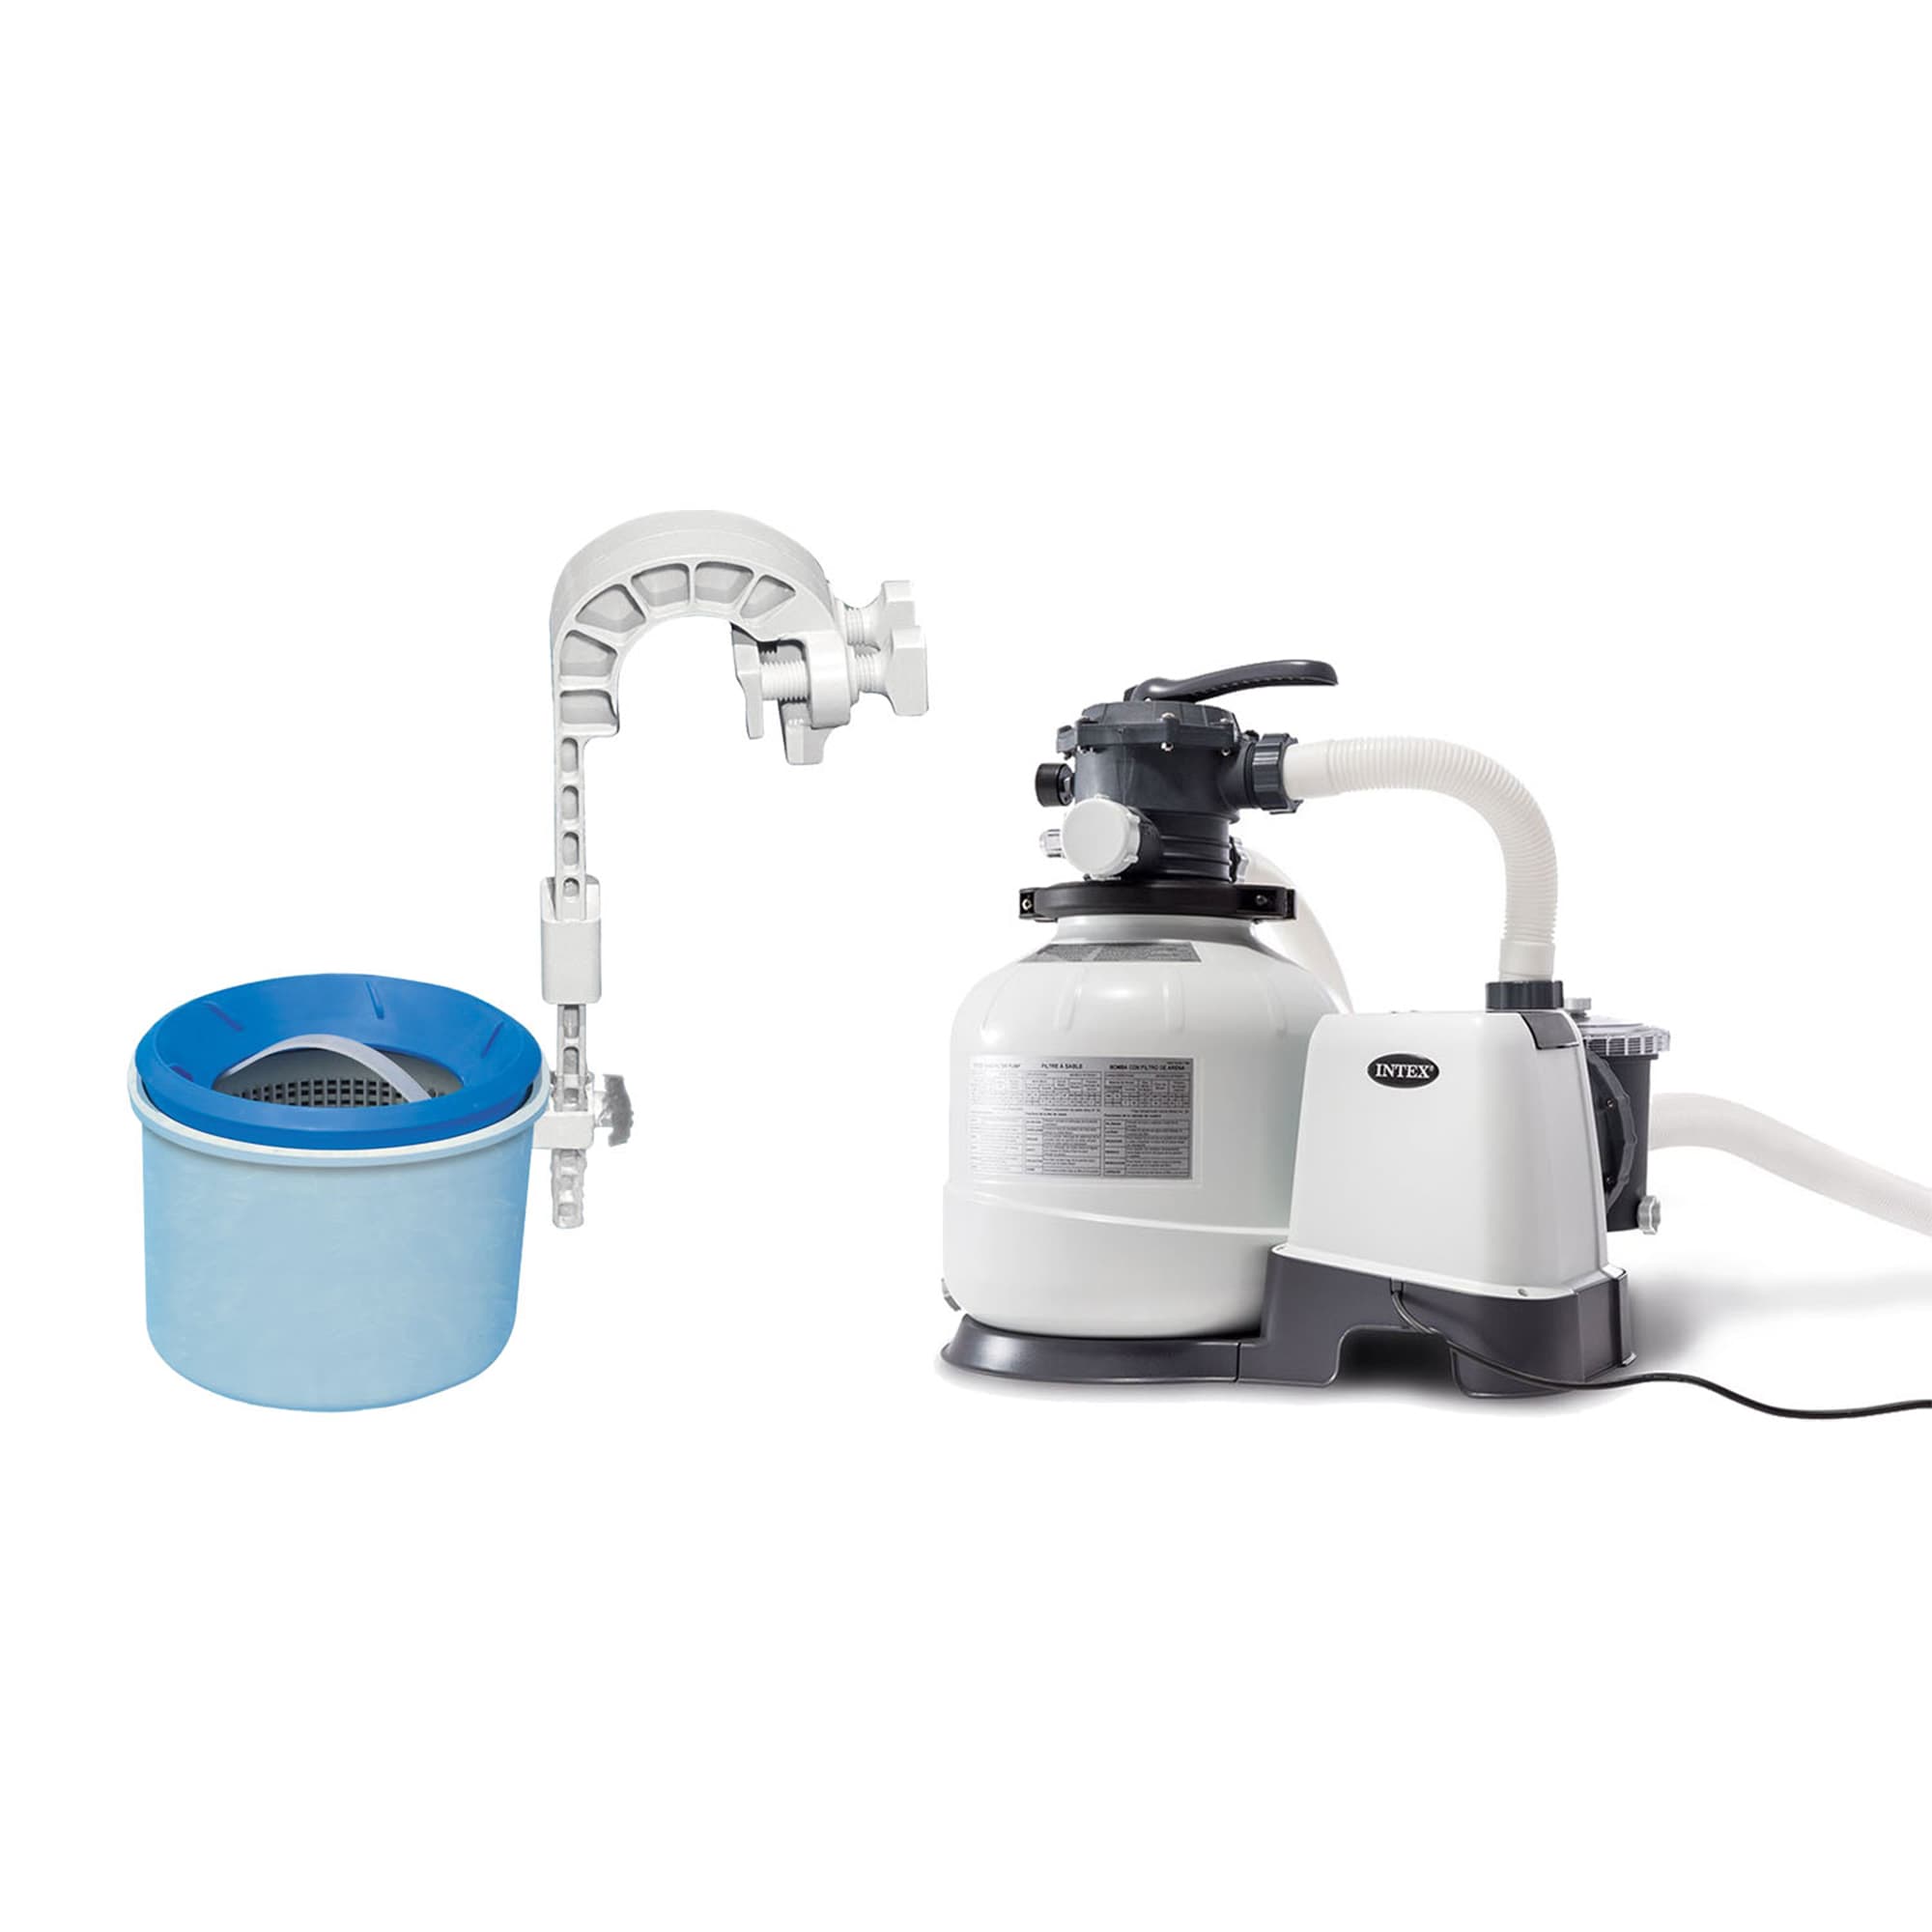 Intex 3000 GPH Pool Filter Pump with Automatic Timer and Automatic Skimmer in the Skimmer Systems department at Lowes.com